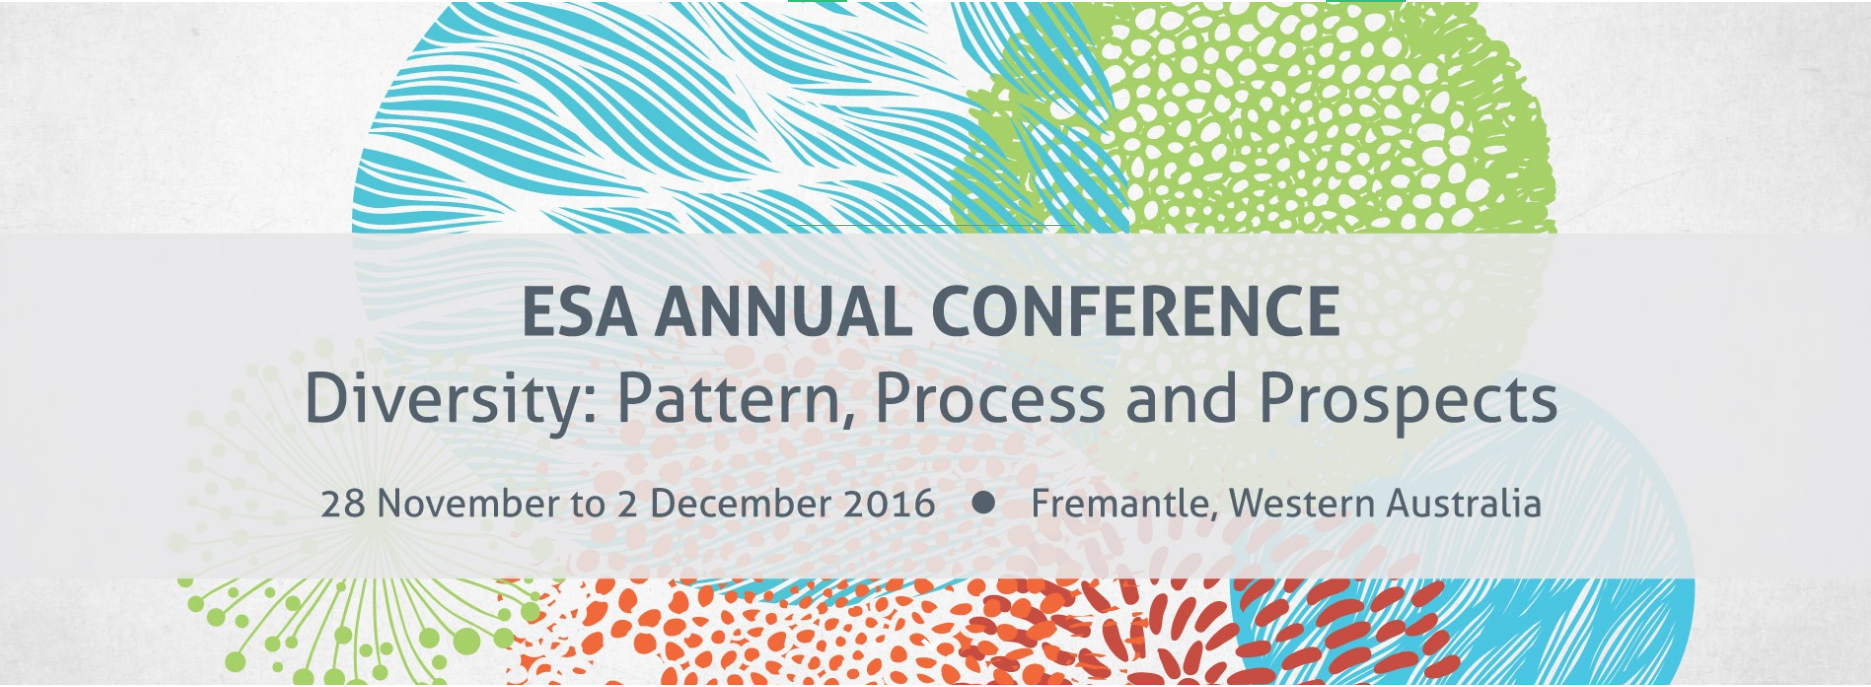 Ecological Society of Australia Annual Conference